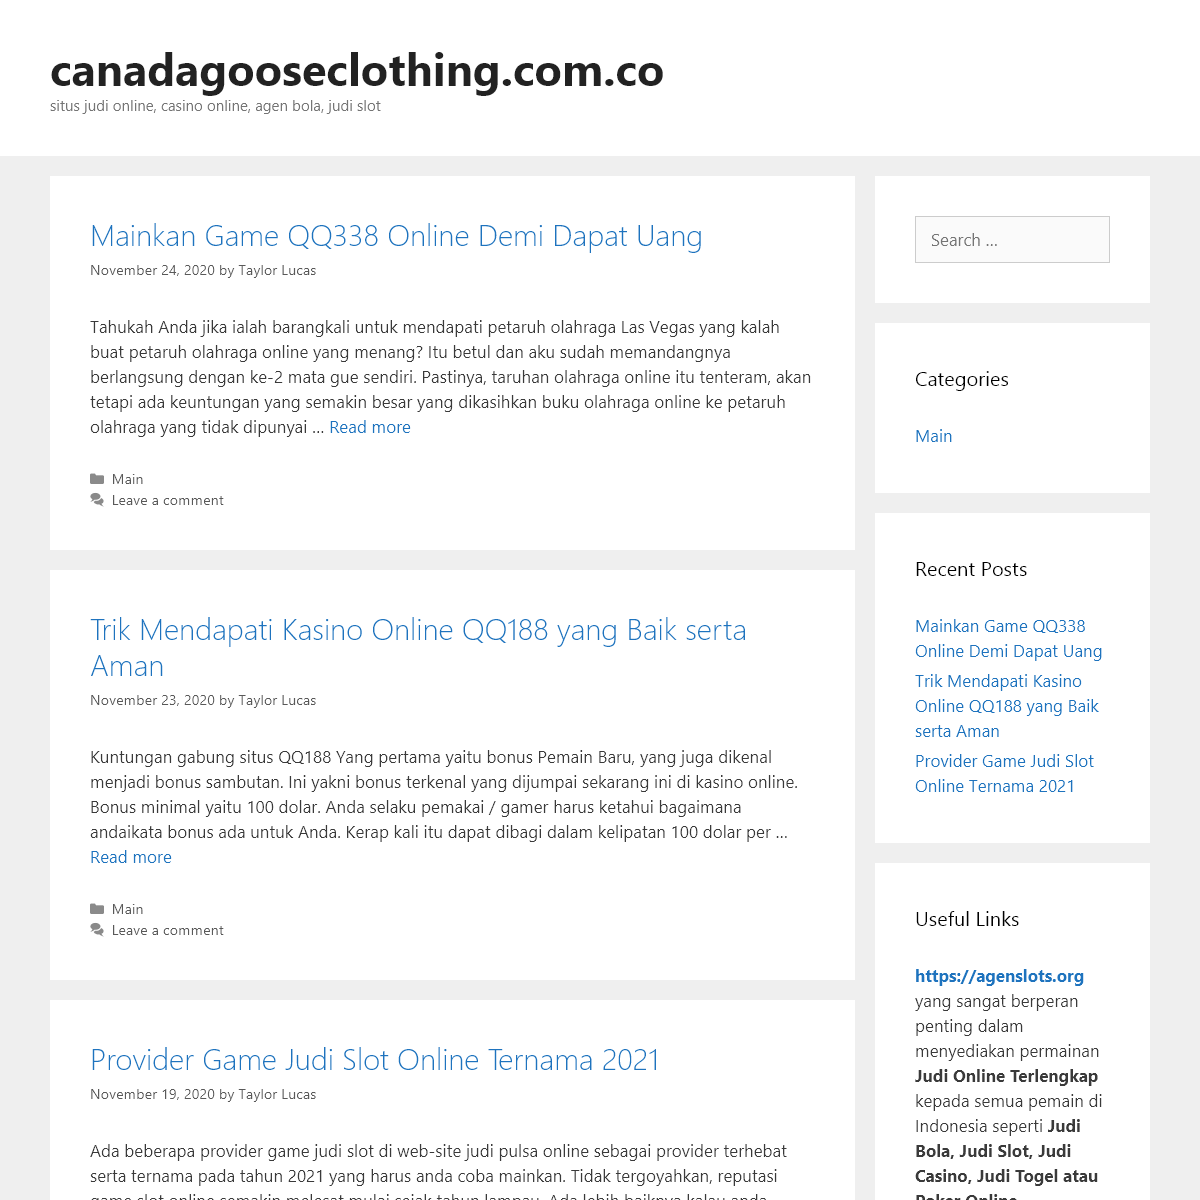 A complete backup of canadagooseclothing.com.co